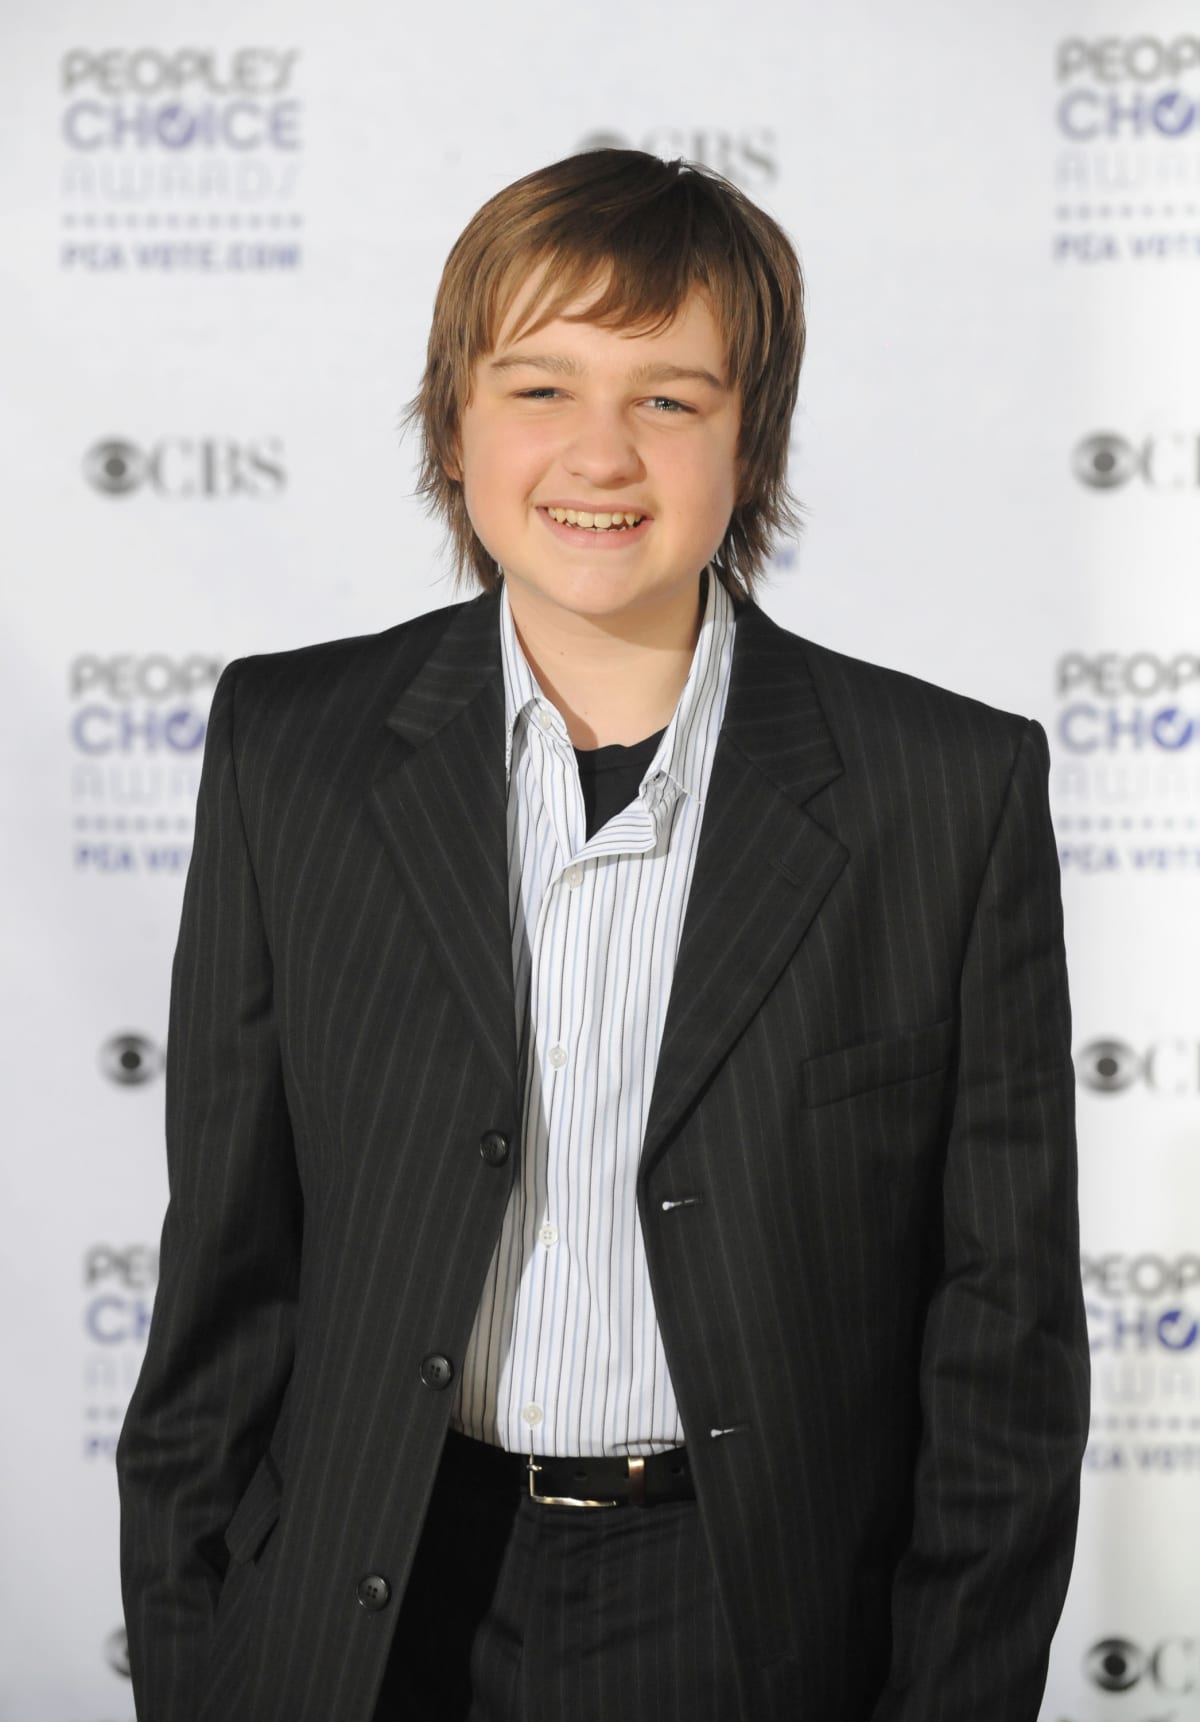 Actor Angus T. Jones arrives at the 35th Annual People's Choice Awards held at the Shrine Auditorium on January 7, 2009 in Los Angeles, California. (Photo by Jeff Kravitz/FilmMagic)